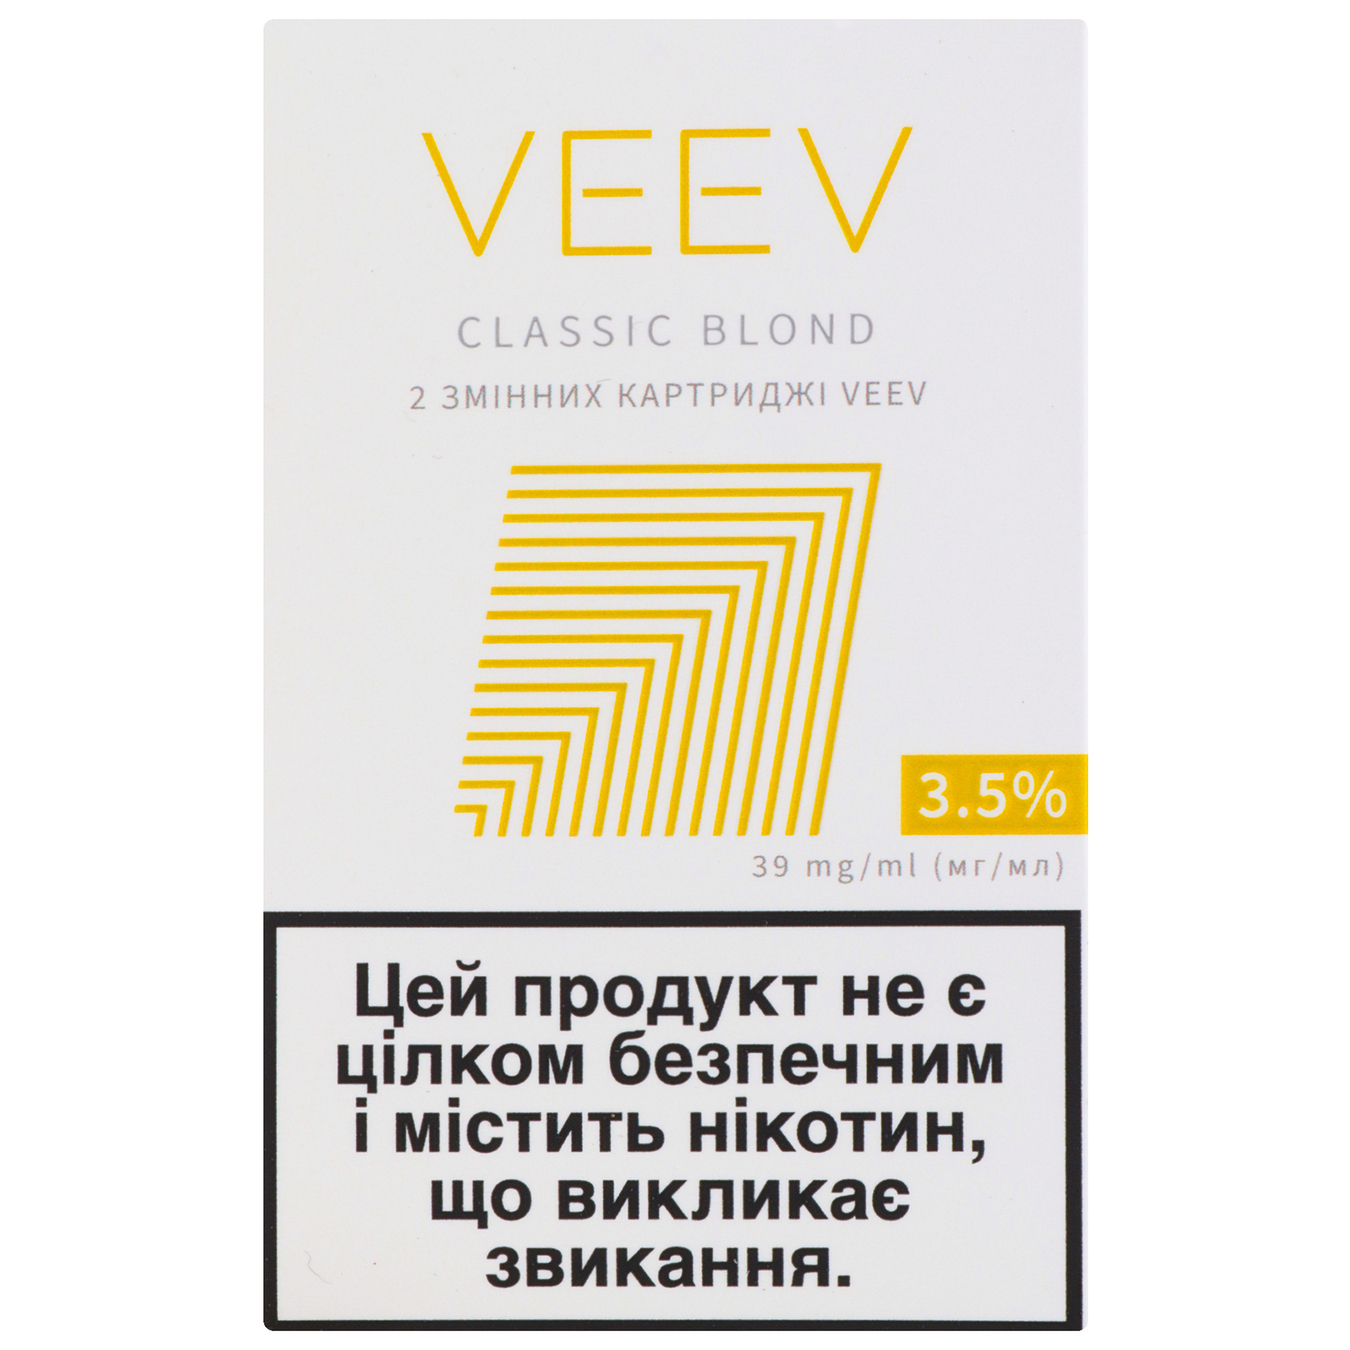 Replaceable cartridge Veev Classic Blond 3.5% (the price is without excise duty)